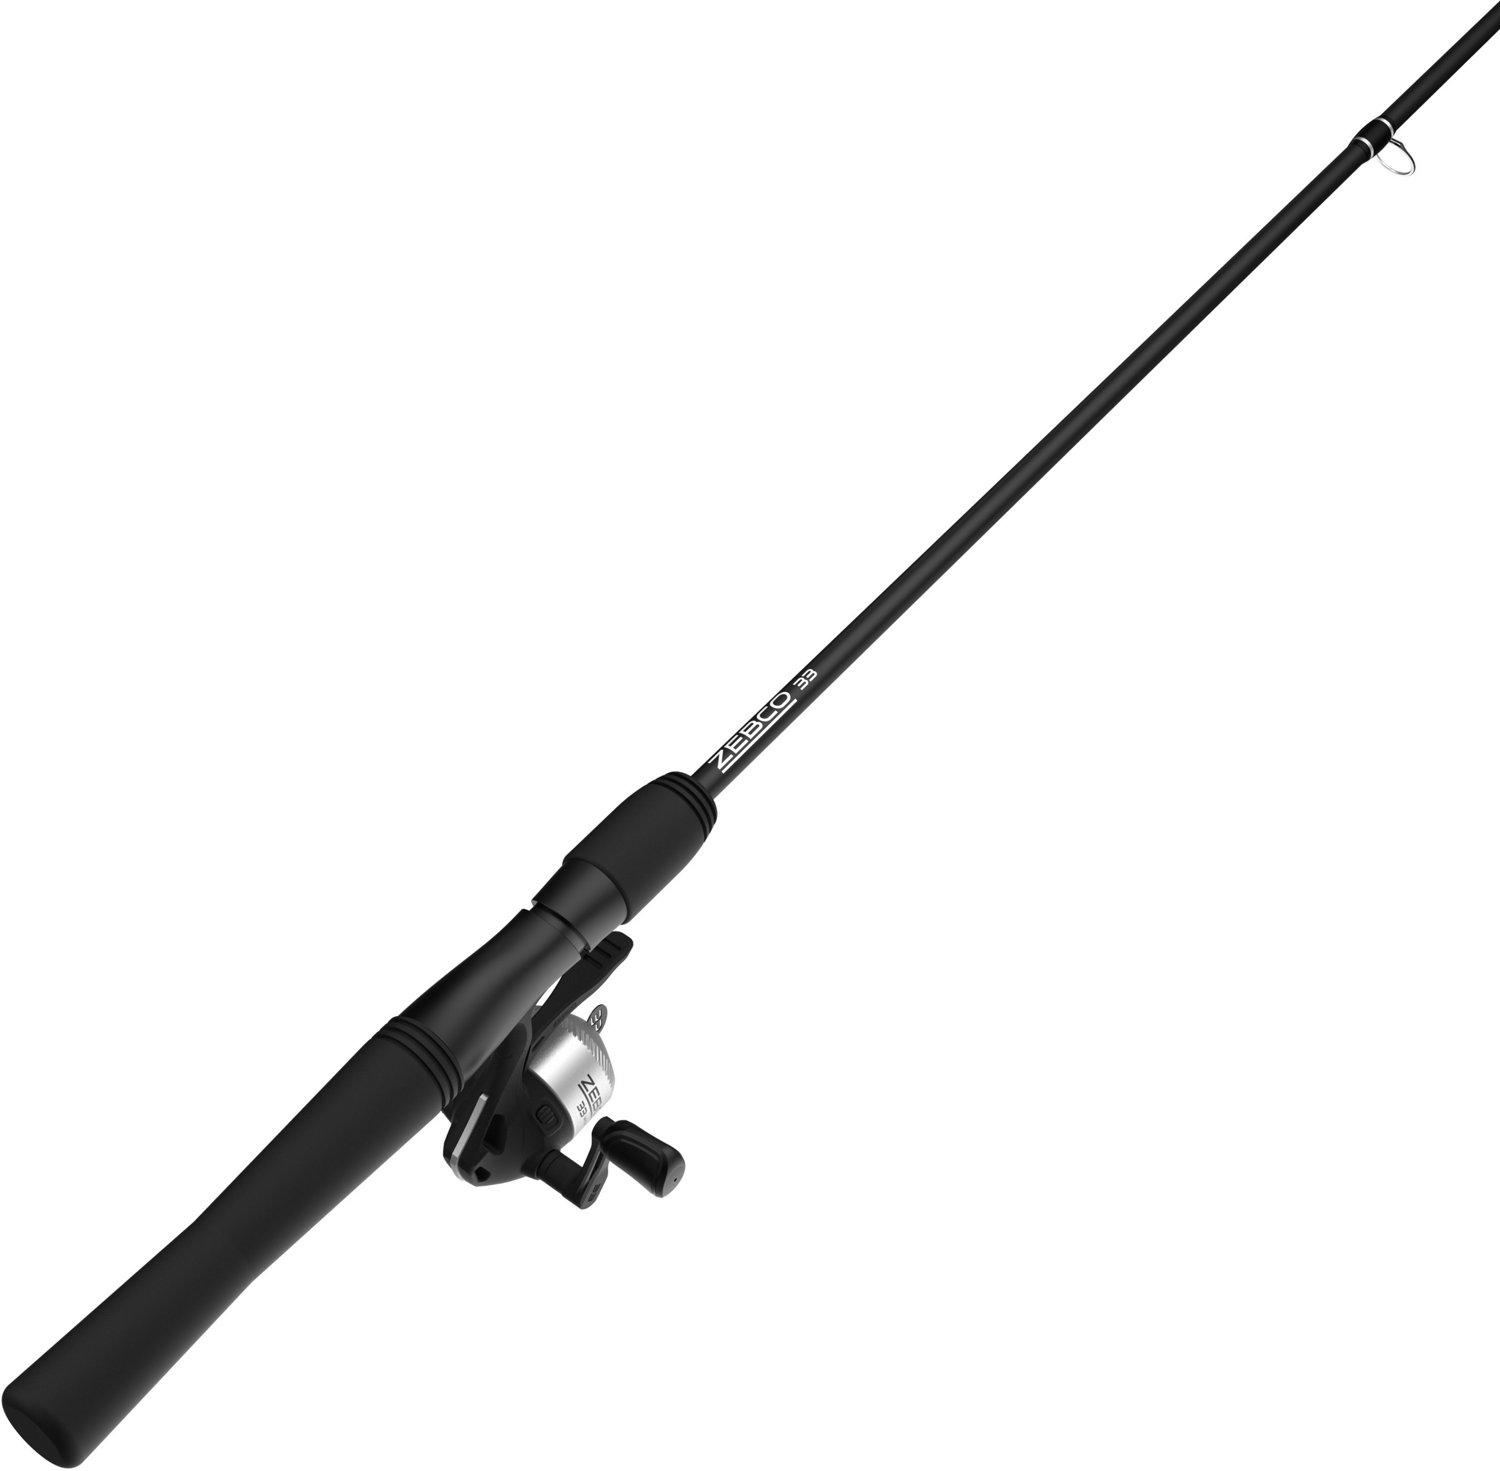 Zebco 33 Micro Trigger 5 ft UL Freshwater Triggerspin Rod and Reel